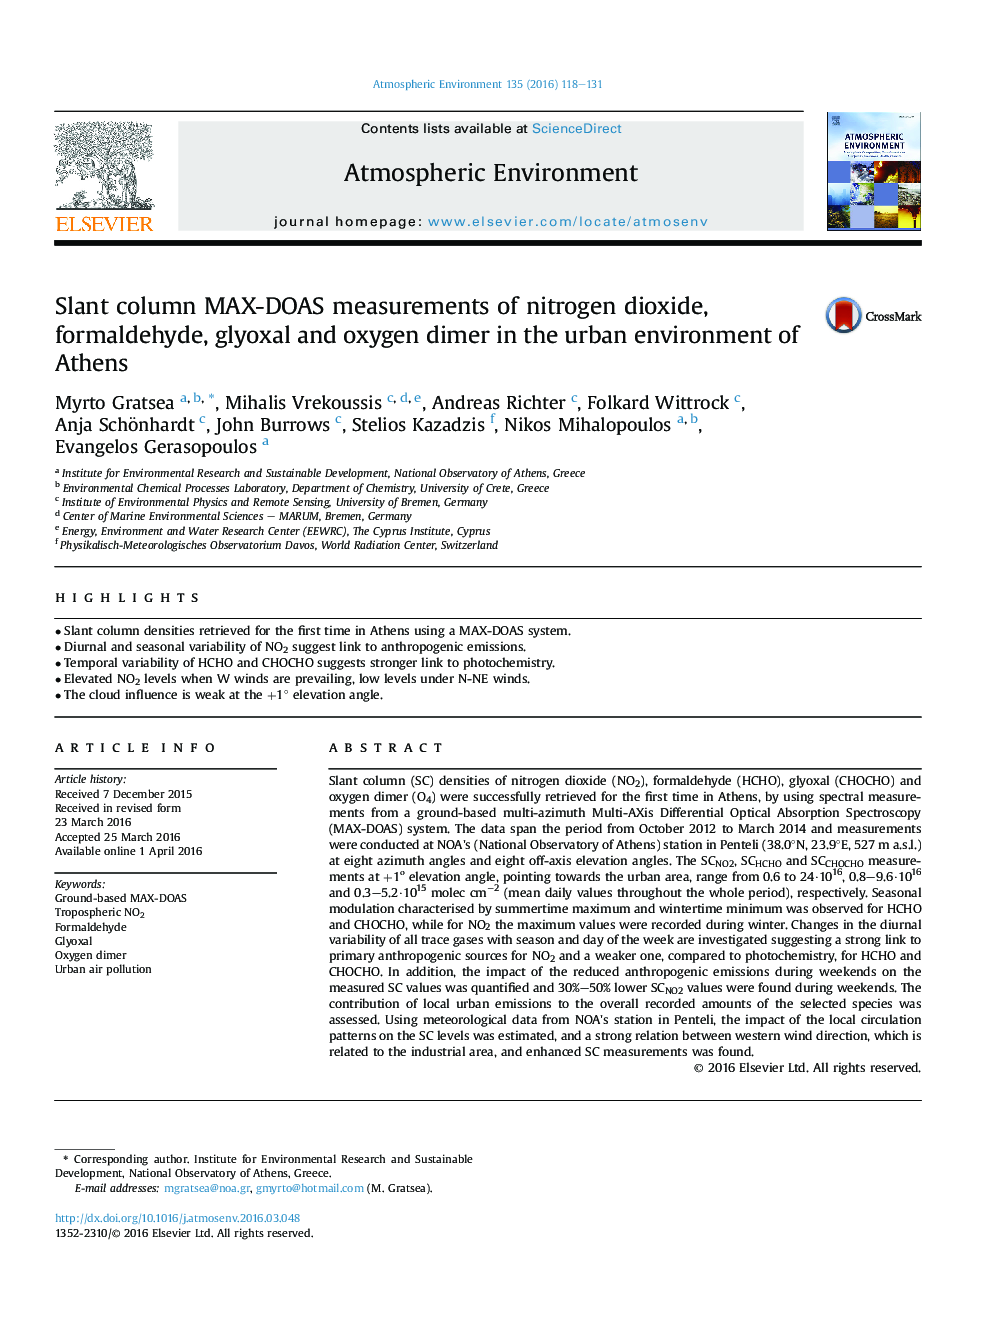 Slant column MAX-DOAS measurements of nitrogen dioxide, formaldehyde, glyoxal and oxygen dimer in the urban environment of Athens